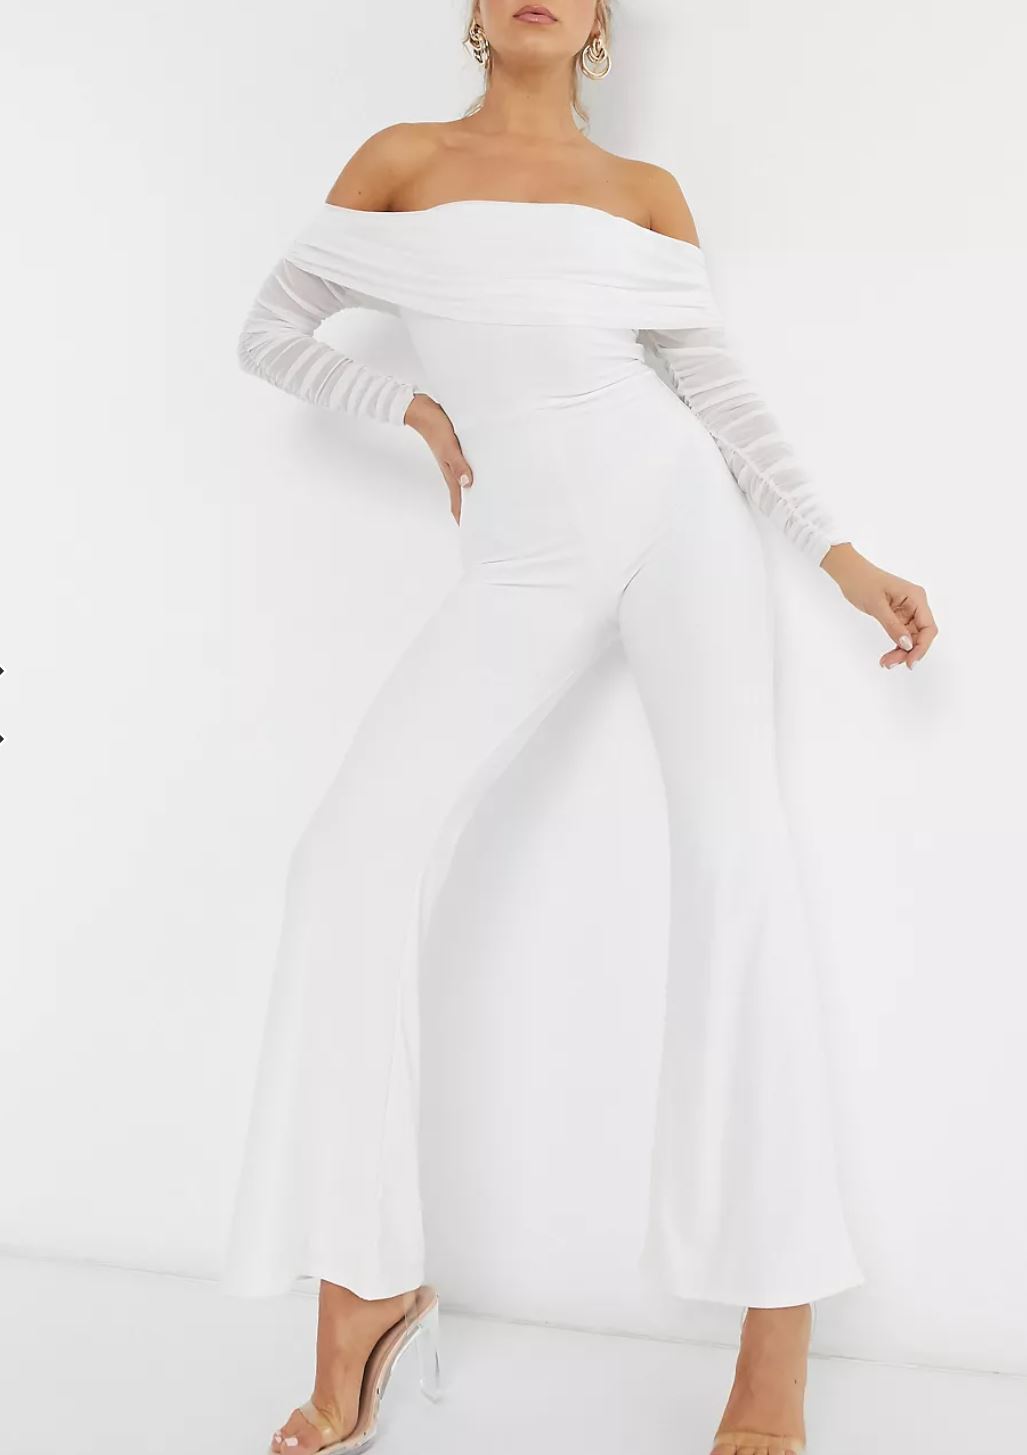 20 Must See Bridal Jumpsuits - crystalcousin.com